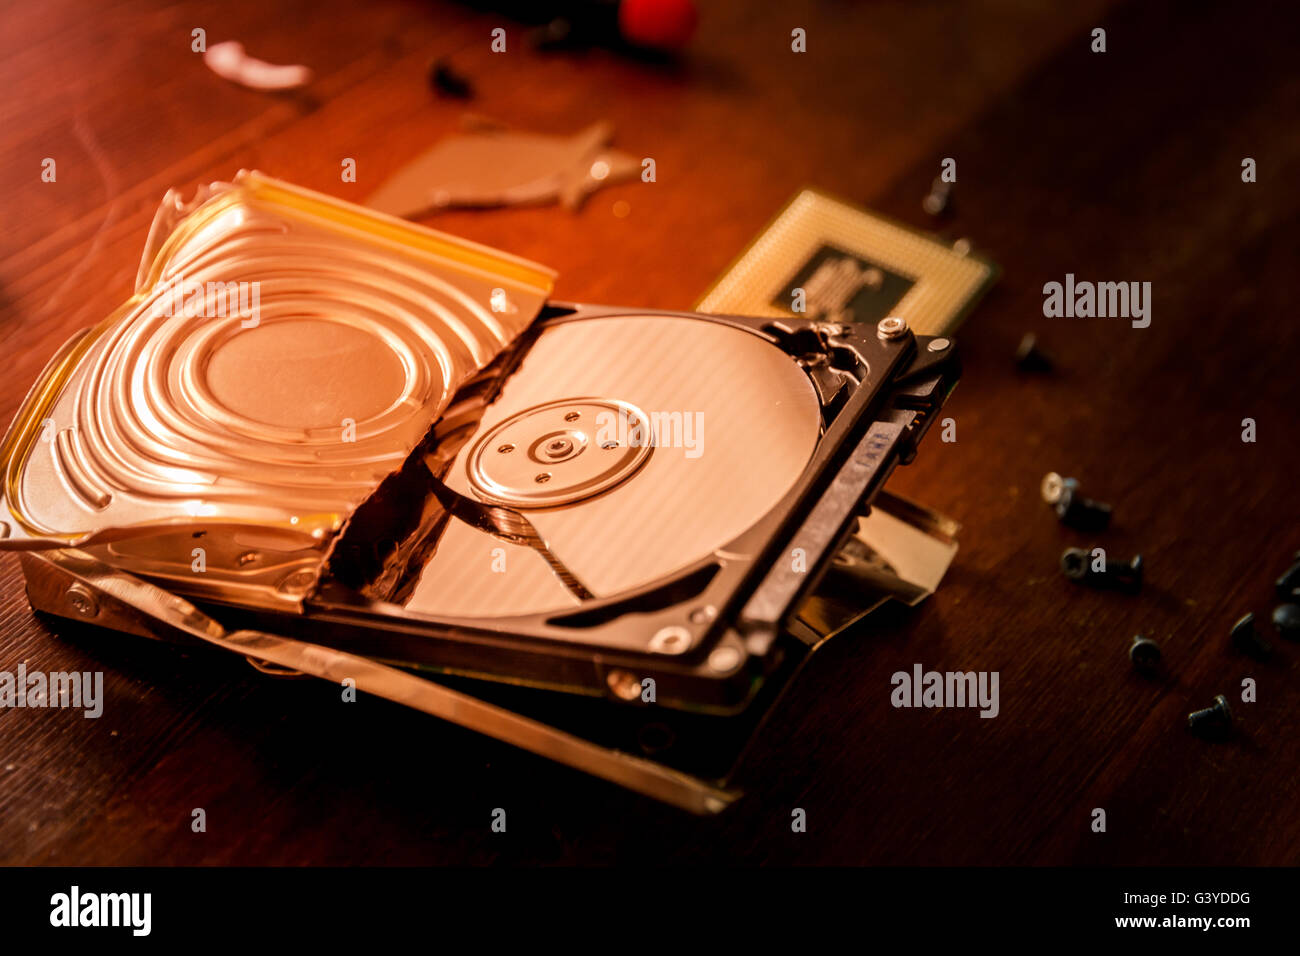 Broken and open computer or laptop hard drive Stock Photo